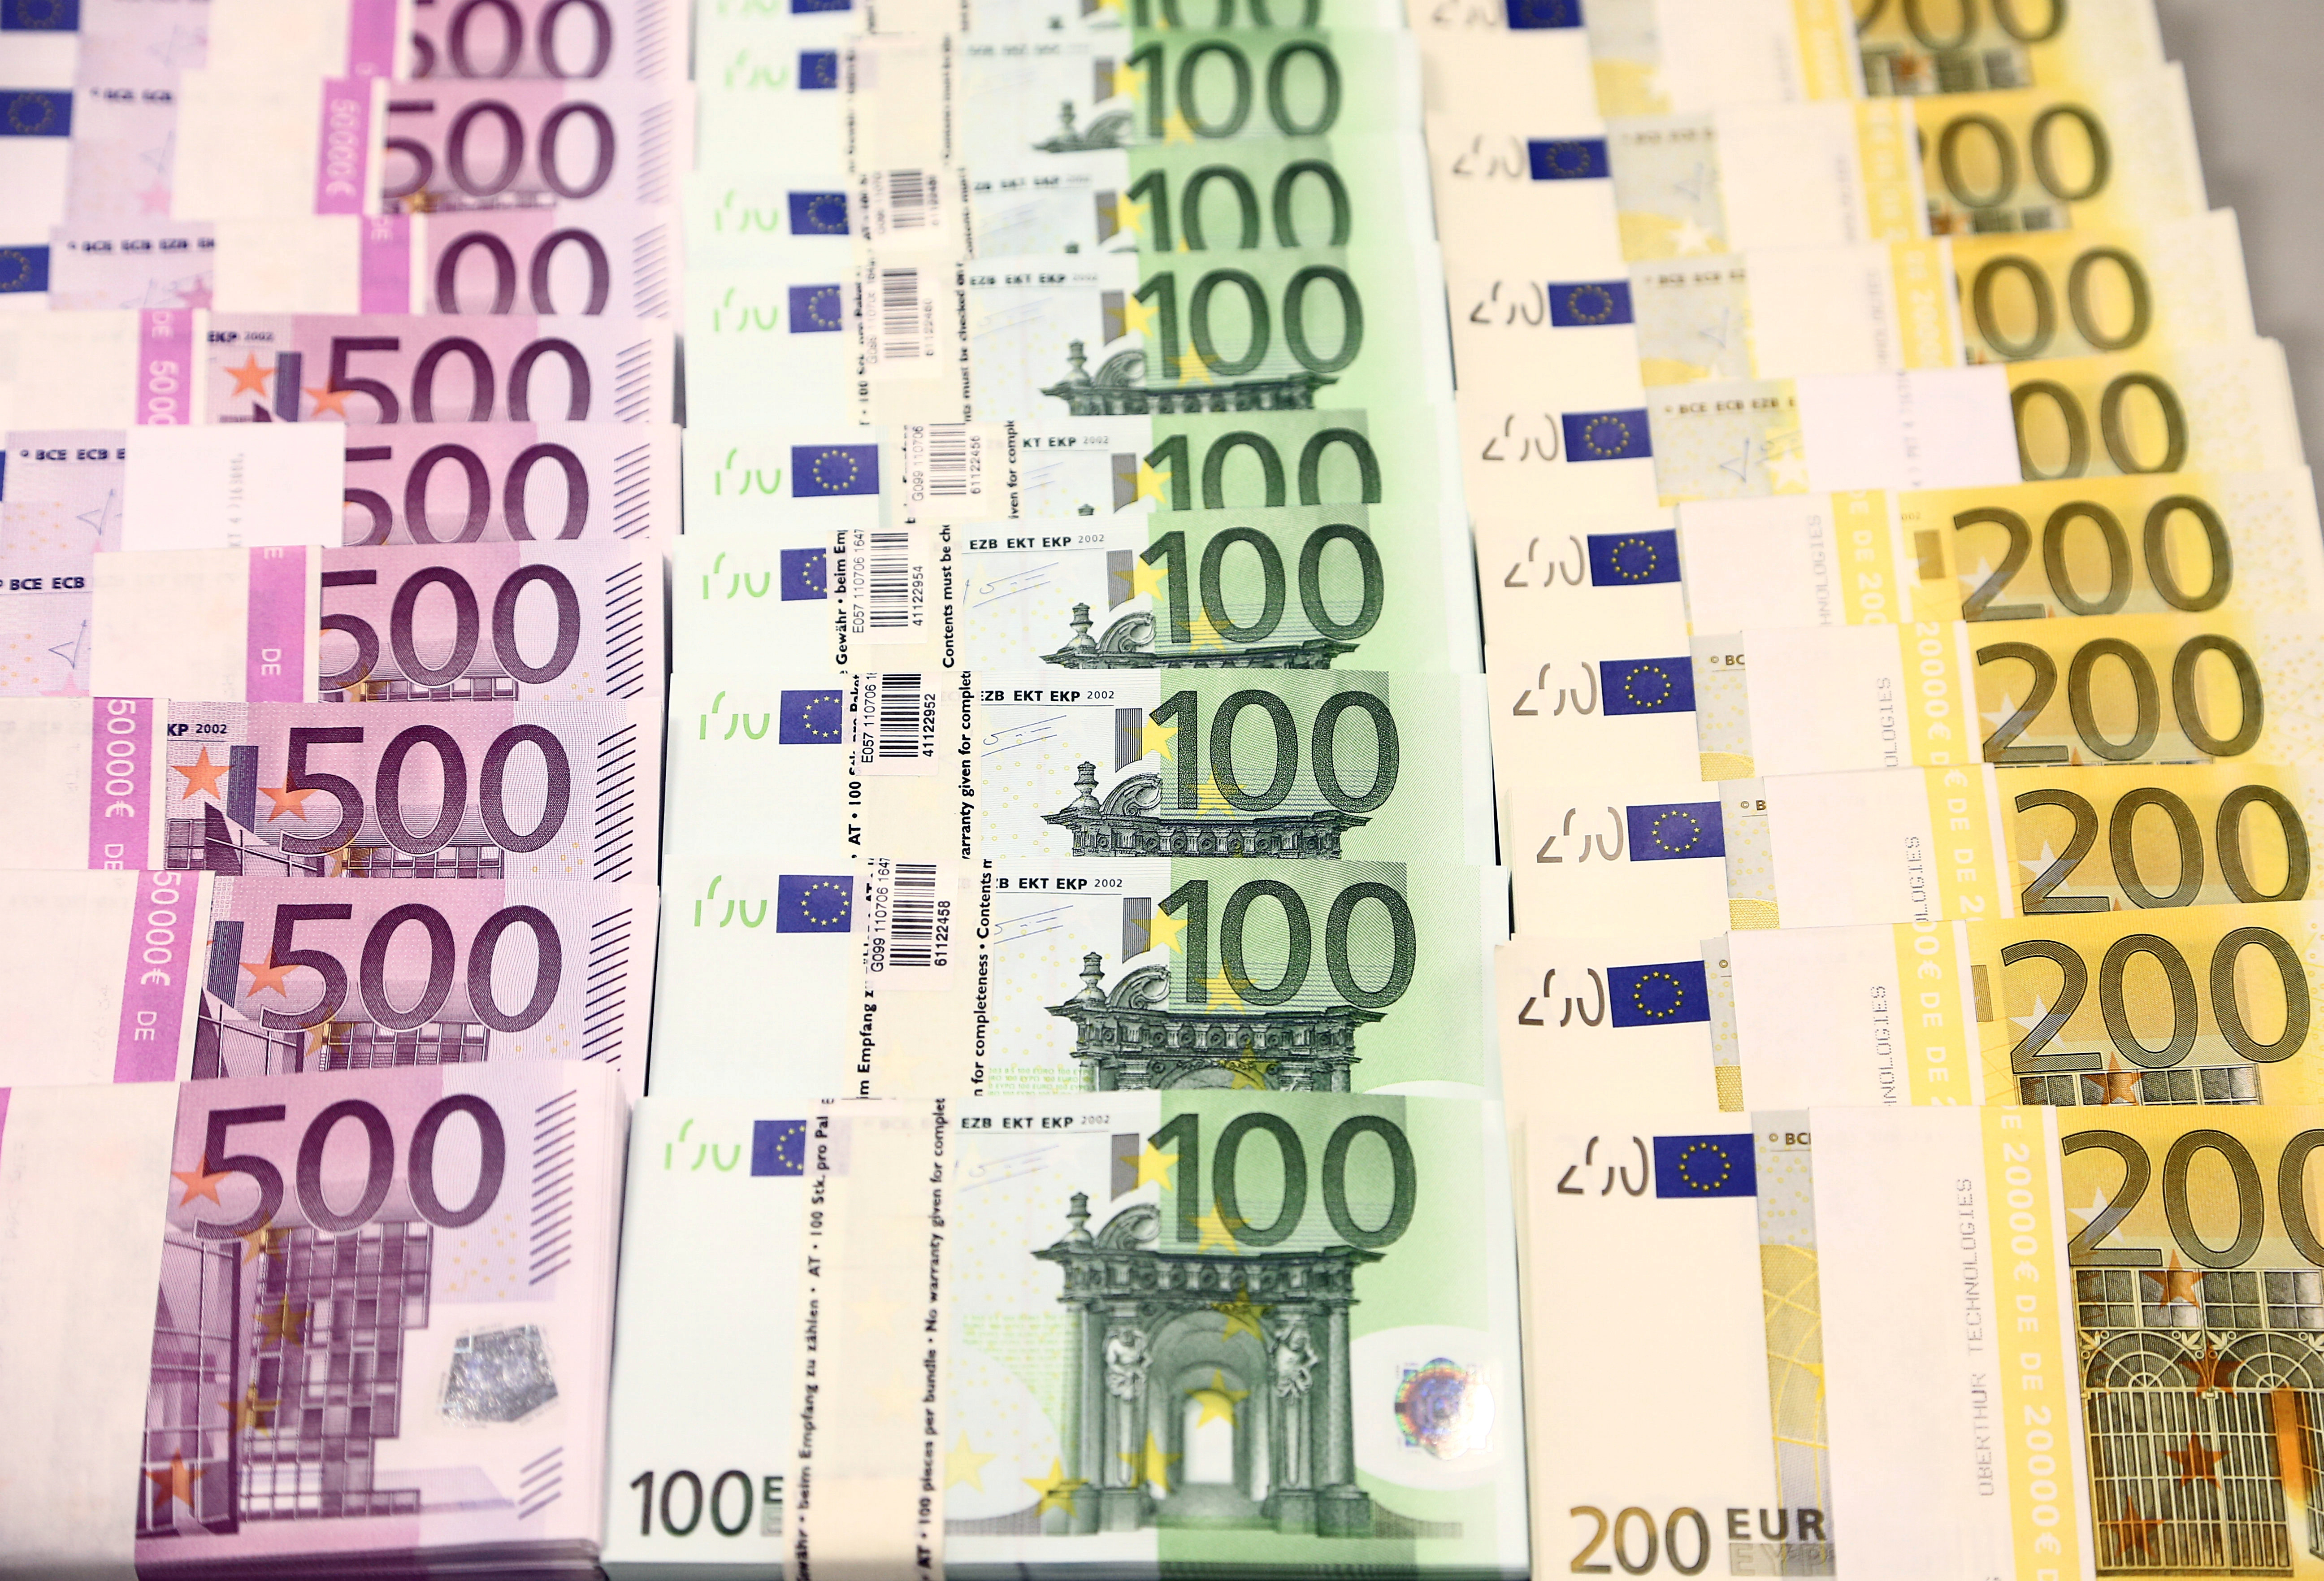 Euro currency bills are pictured at the Croatian National Bank in Zagreb